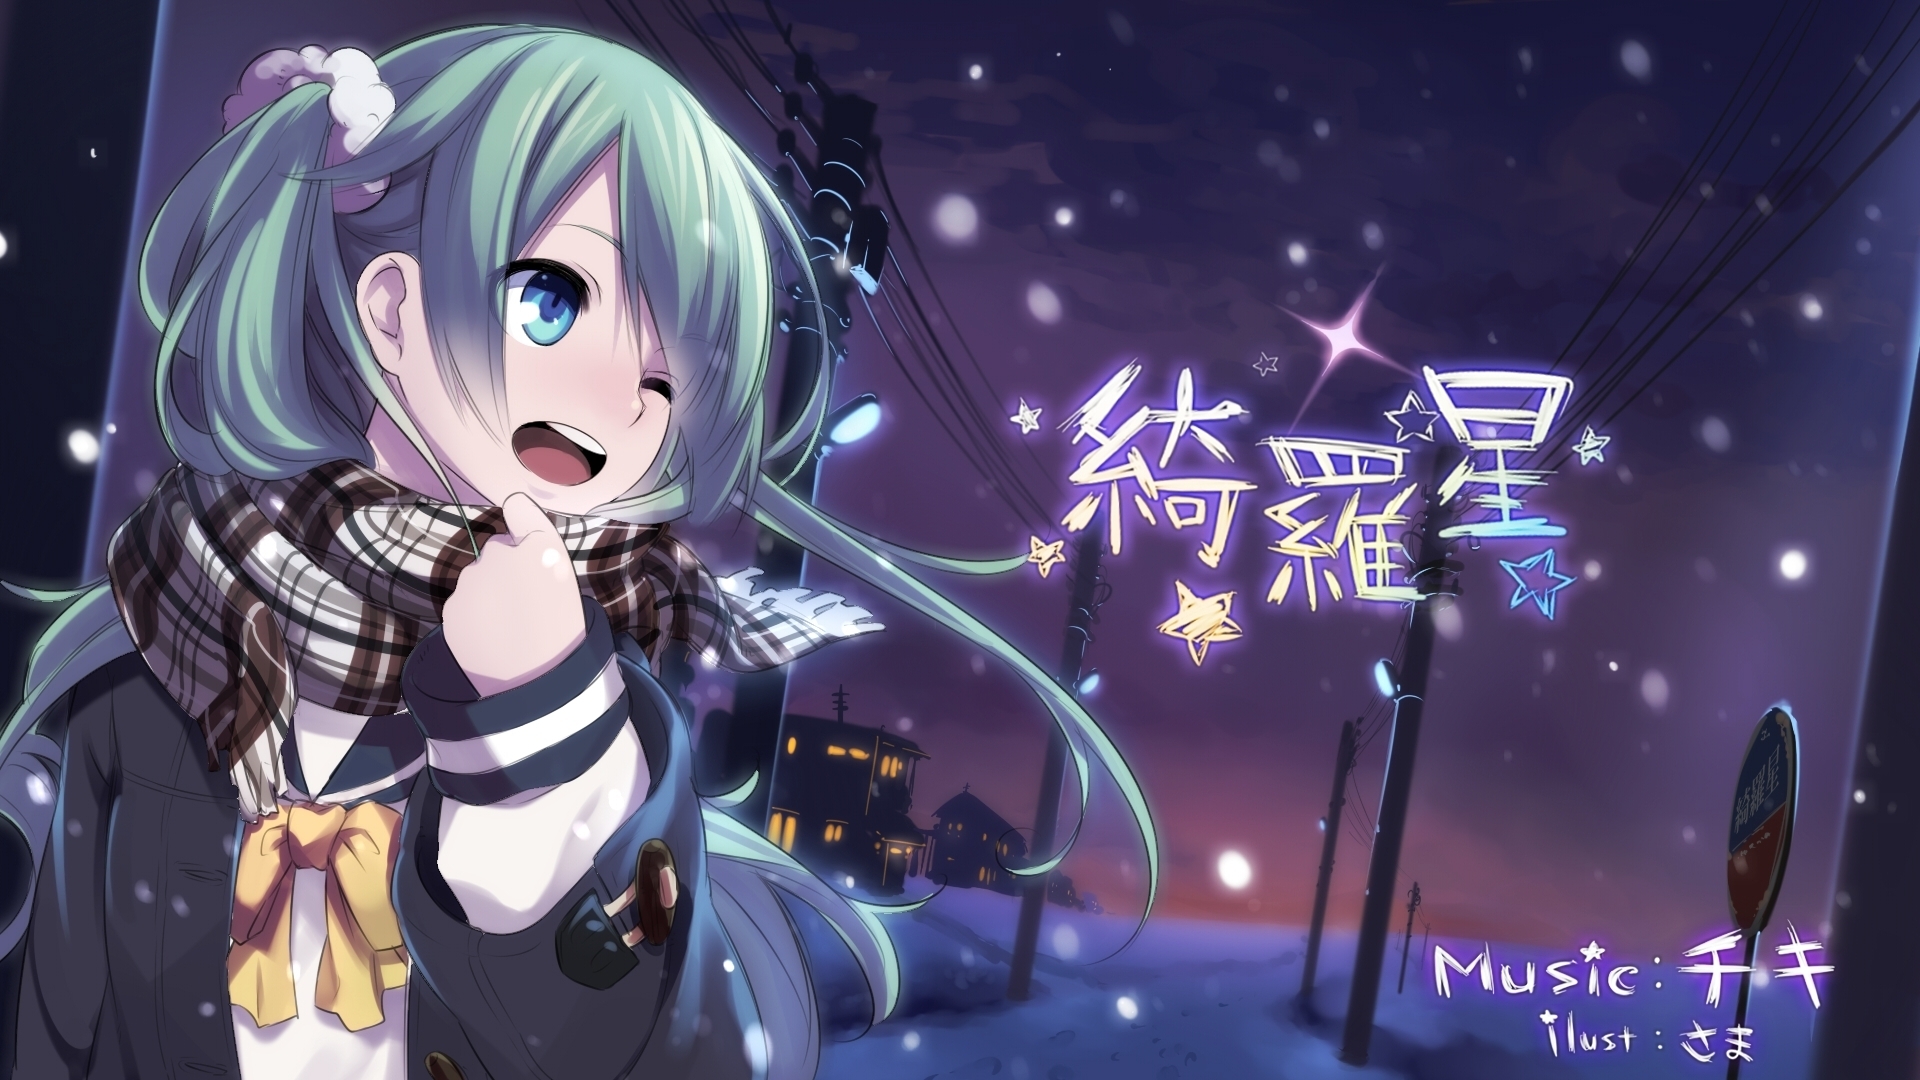 Hatsune Miku Girl Cute Smile Evening Full Ver By Yamimune On